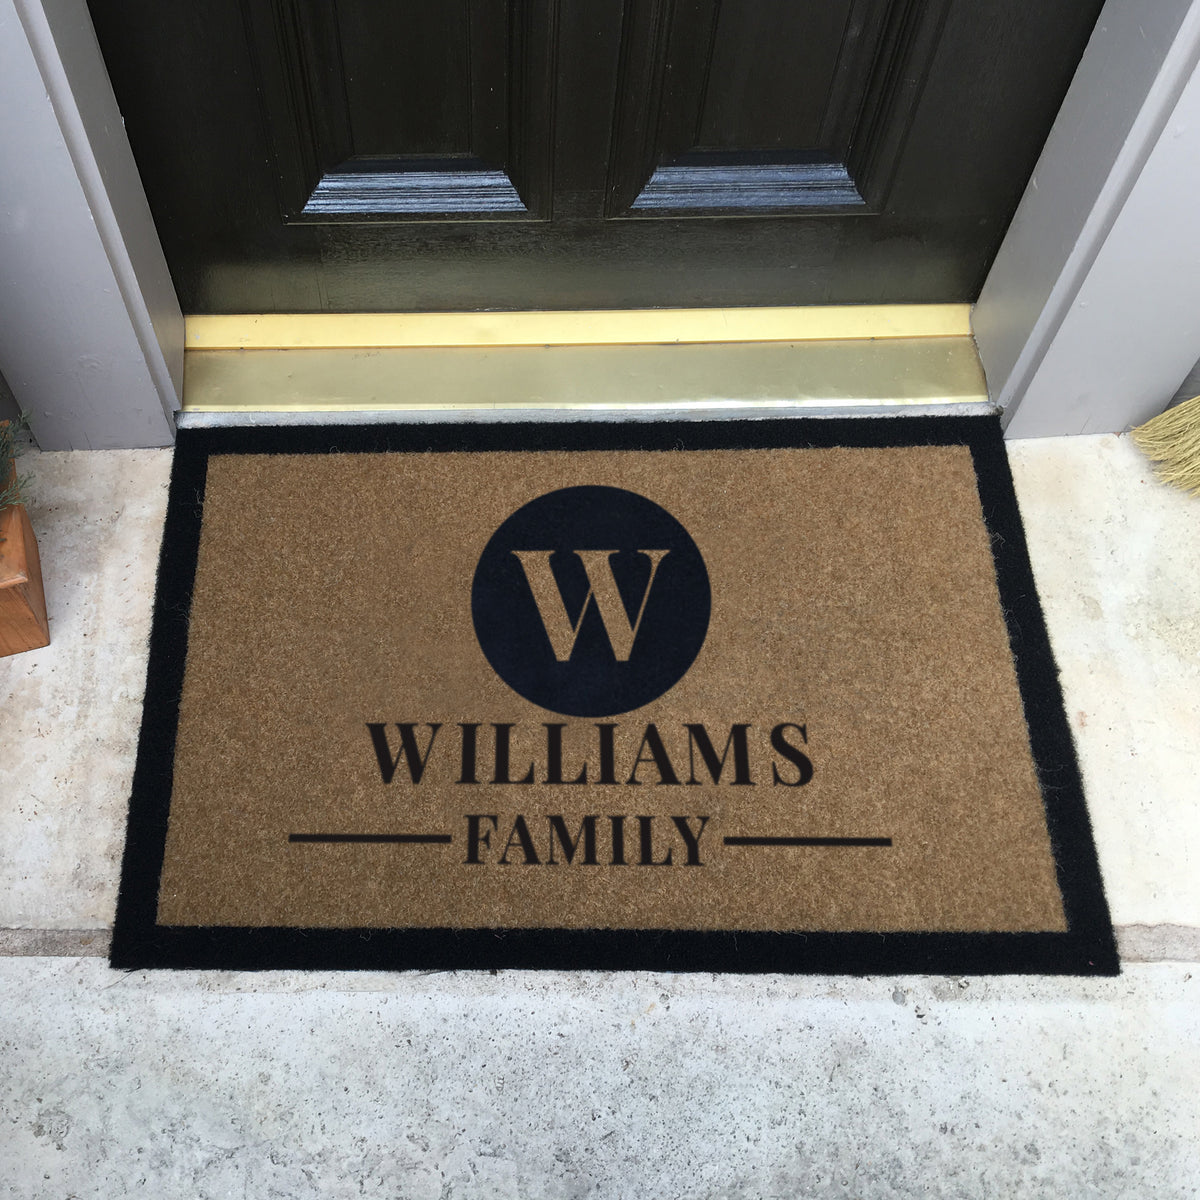 Infinity Custom Mats™ All-Weather Personalized Doormat - STYLE: CIRCLE COLOR:TAN - rugsthatfit.com